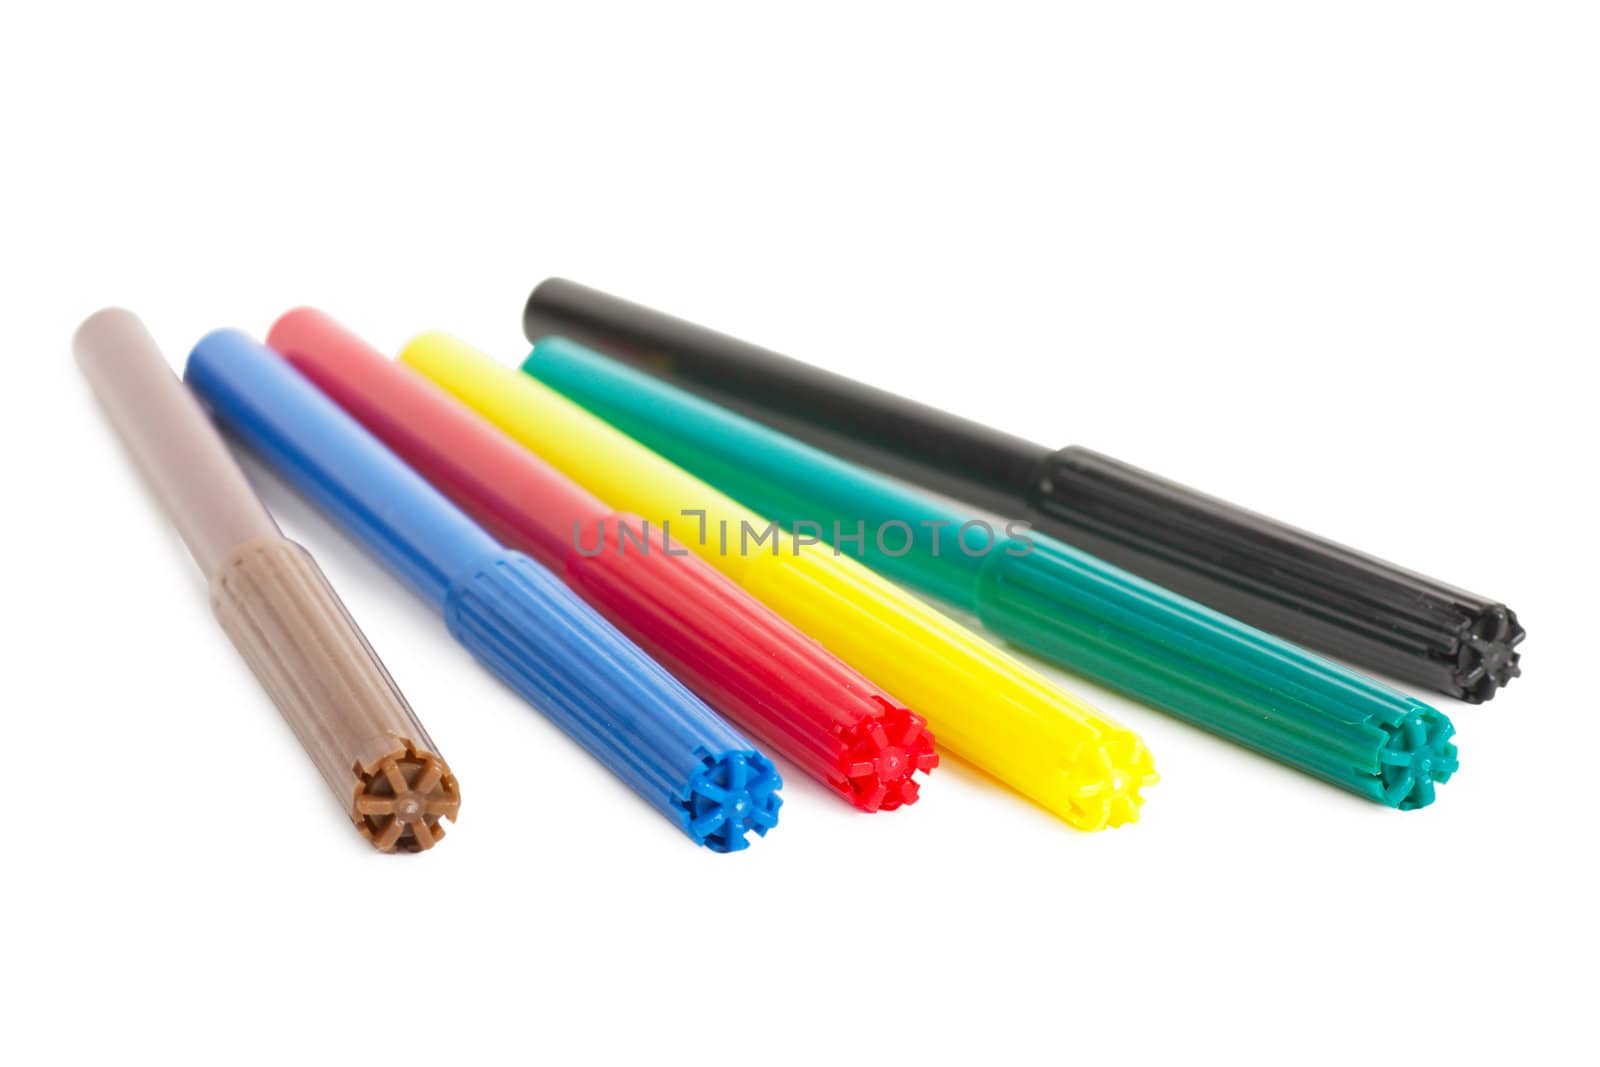 Six colorful markers (brown, blue, red, yellow, green and black) over white background